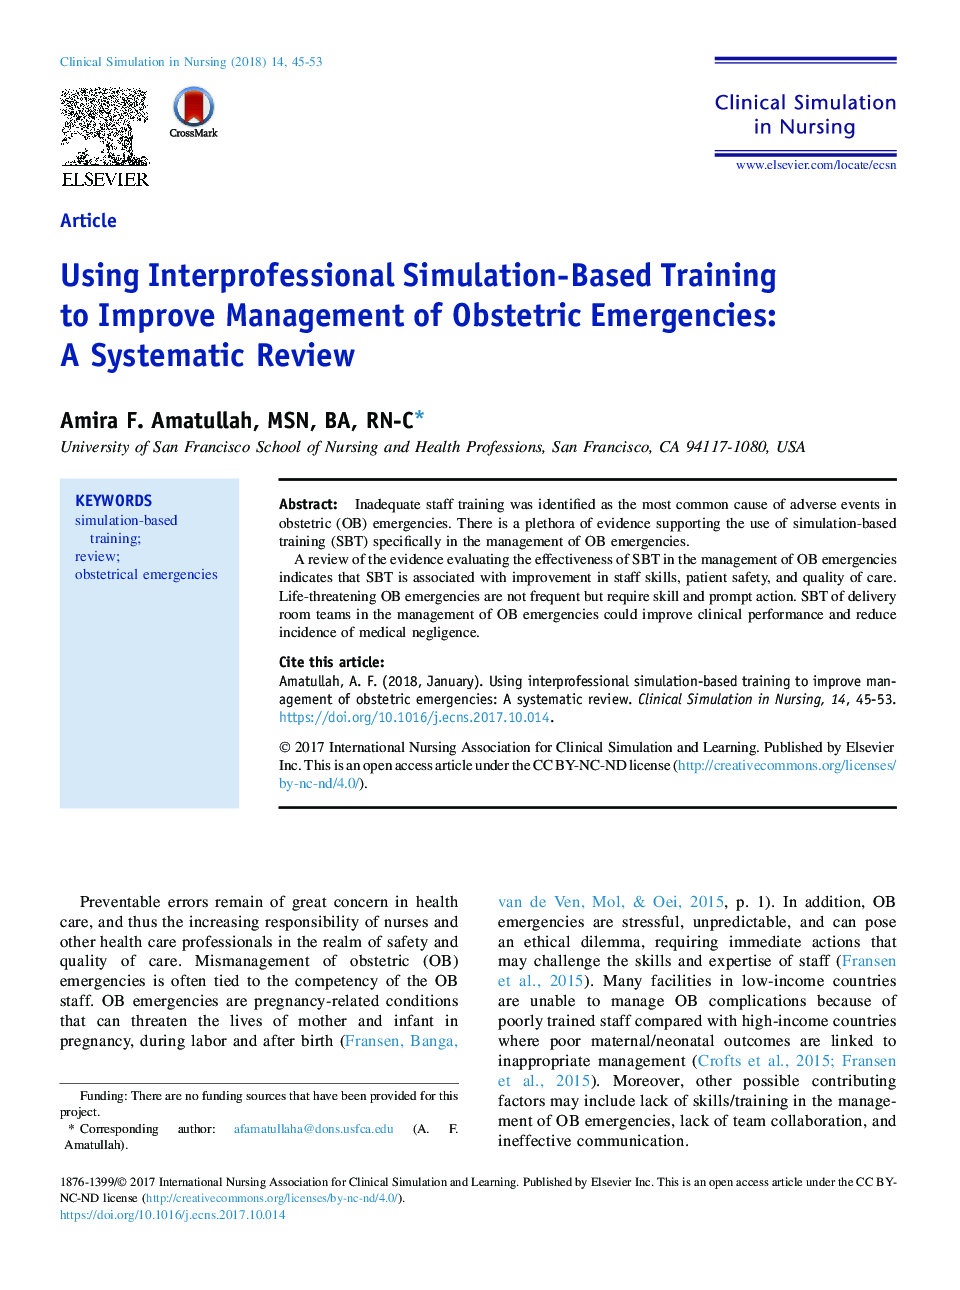 Using Interprofessional Simulation-Based Training to Improve Management of Obstetric Emergencies: A Systematic Review